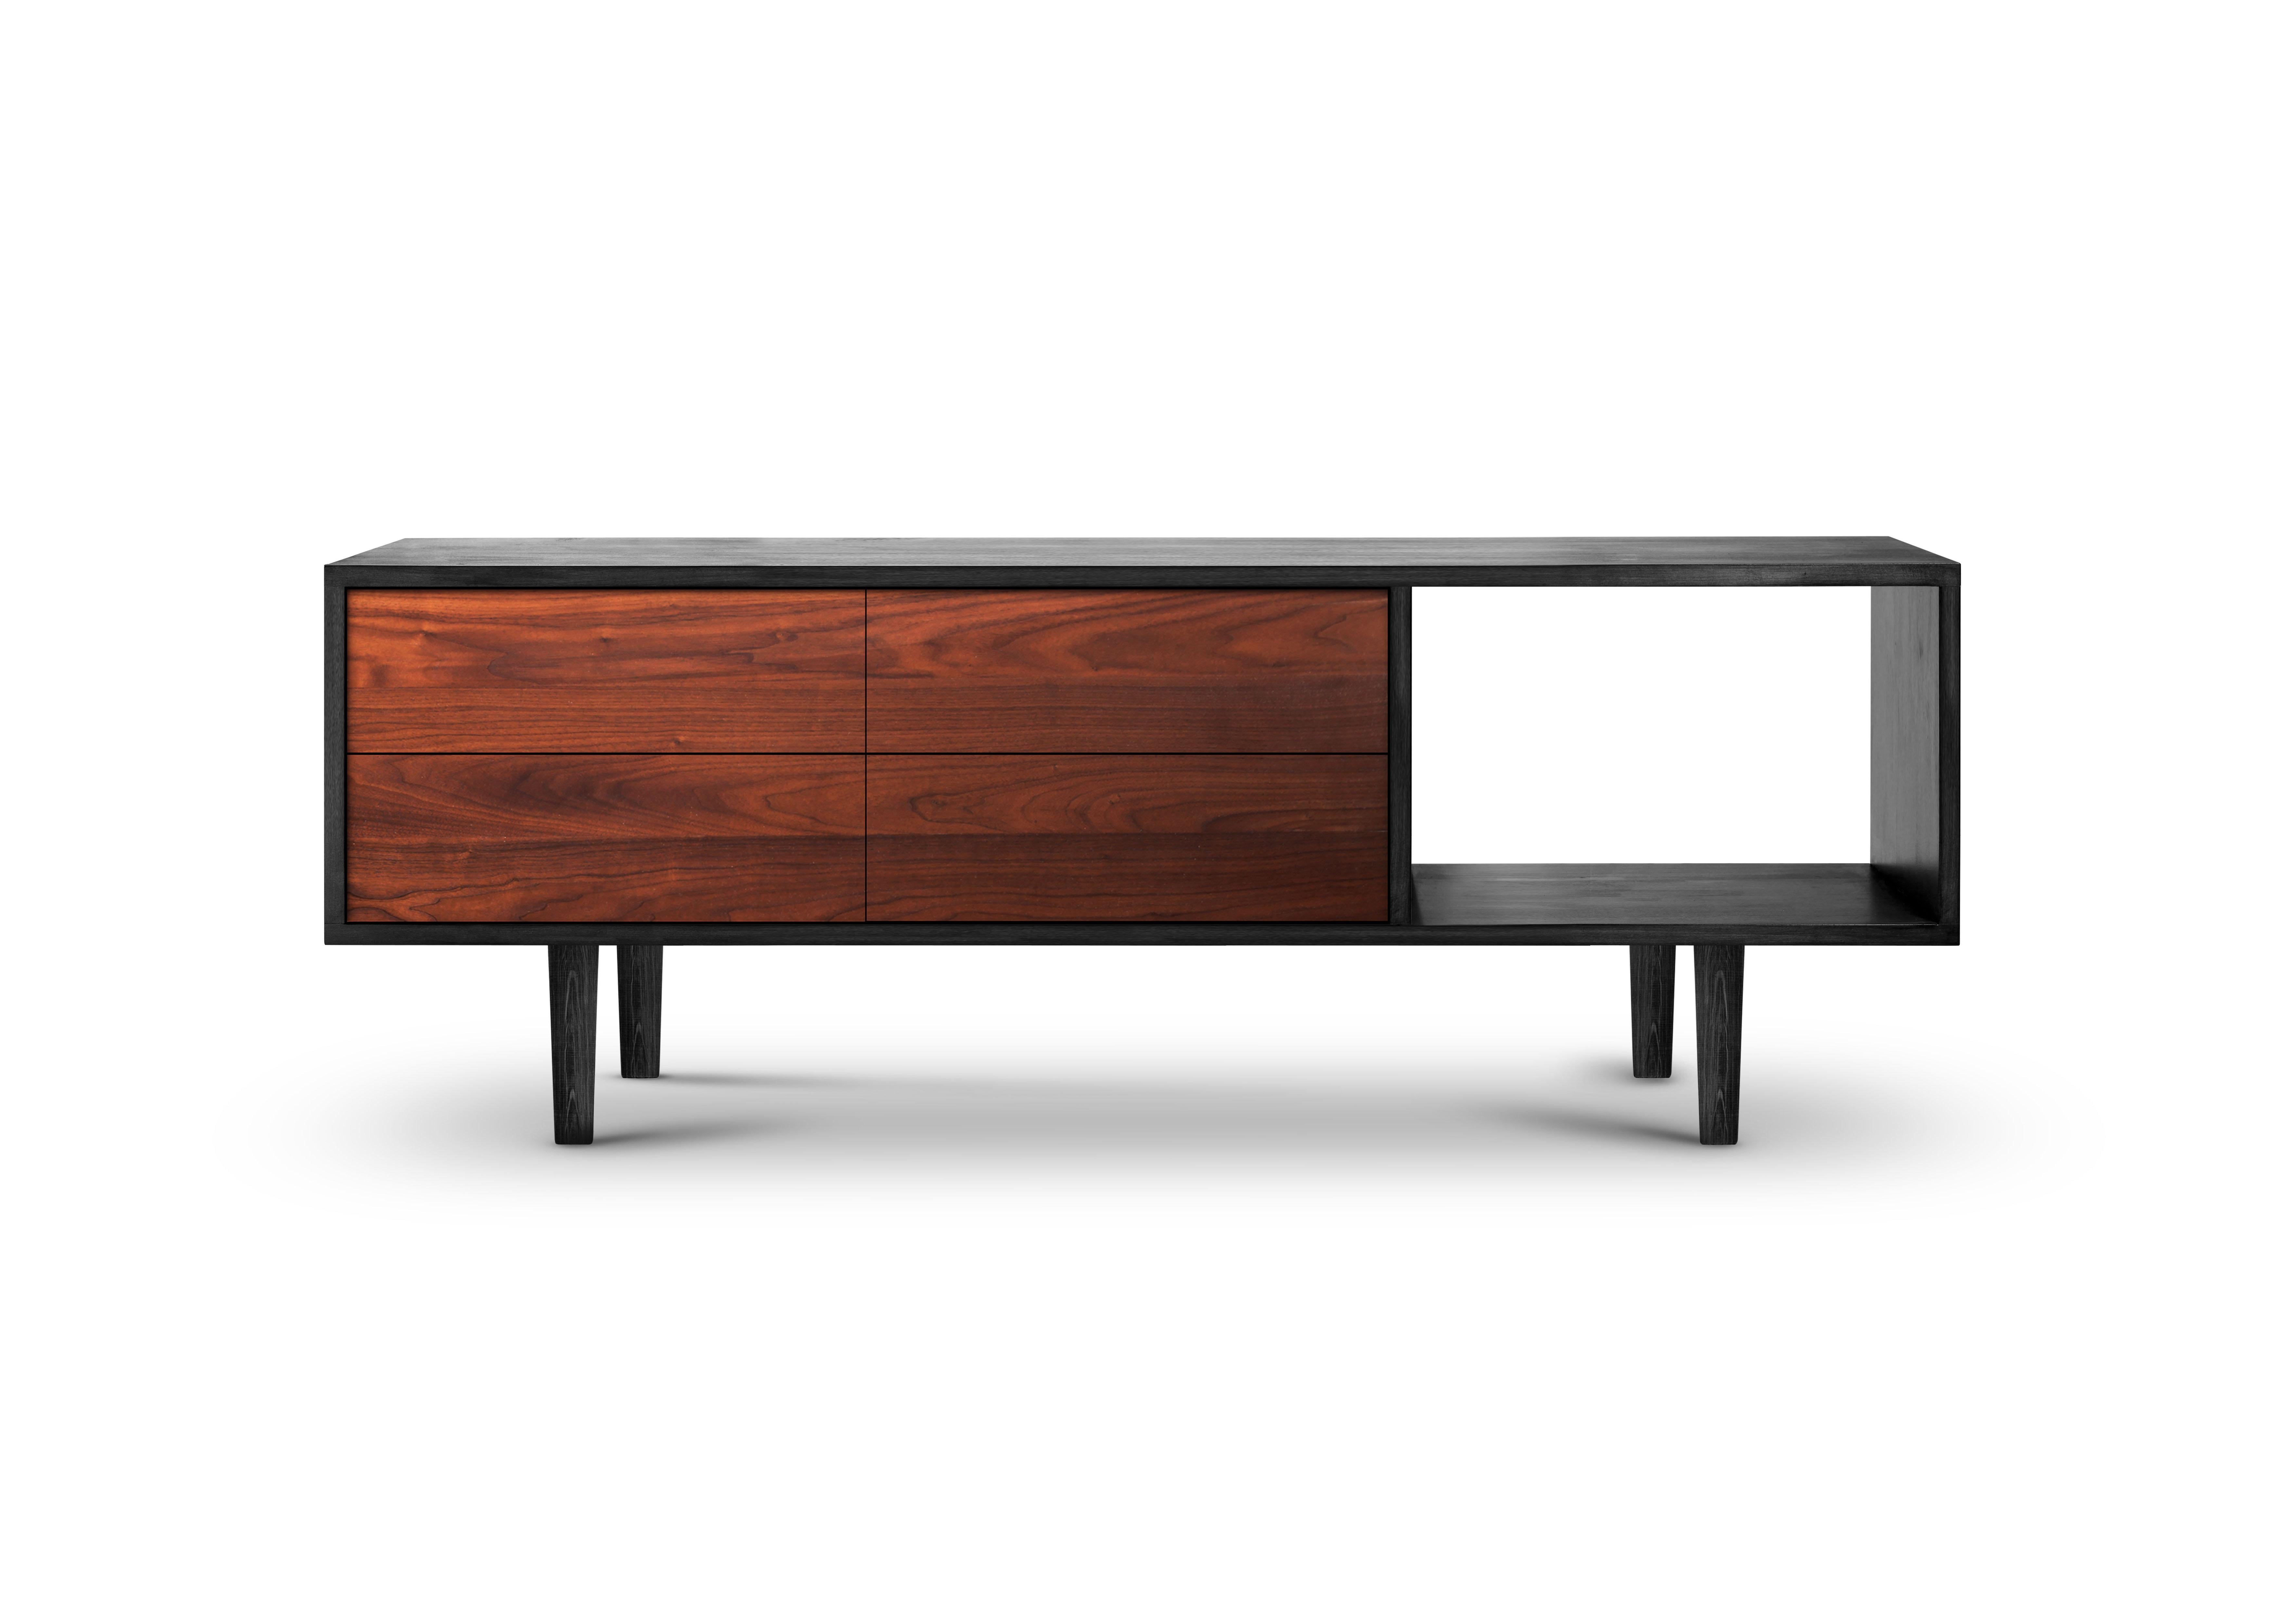 The high end modern media console Apollo offers the ultimate in unmistakable midcentury style. Superbly executed by European master craftsmen this console is particularly outstanding in its minimalist style. Beautifully crafted with a fine walnut